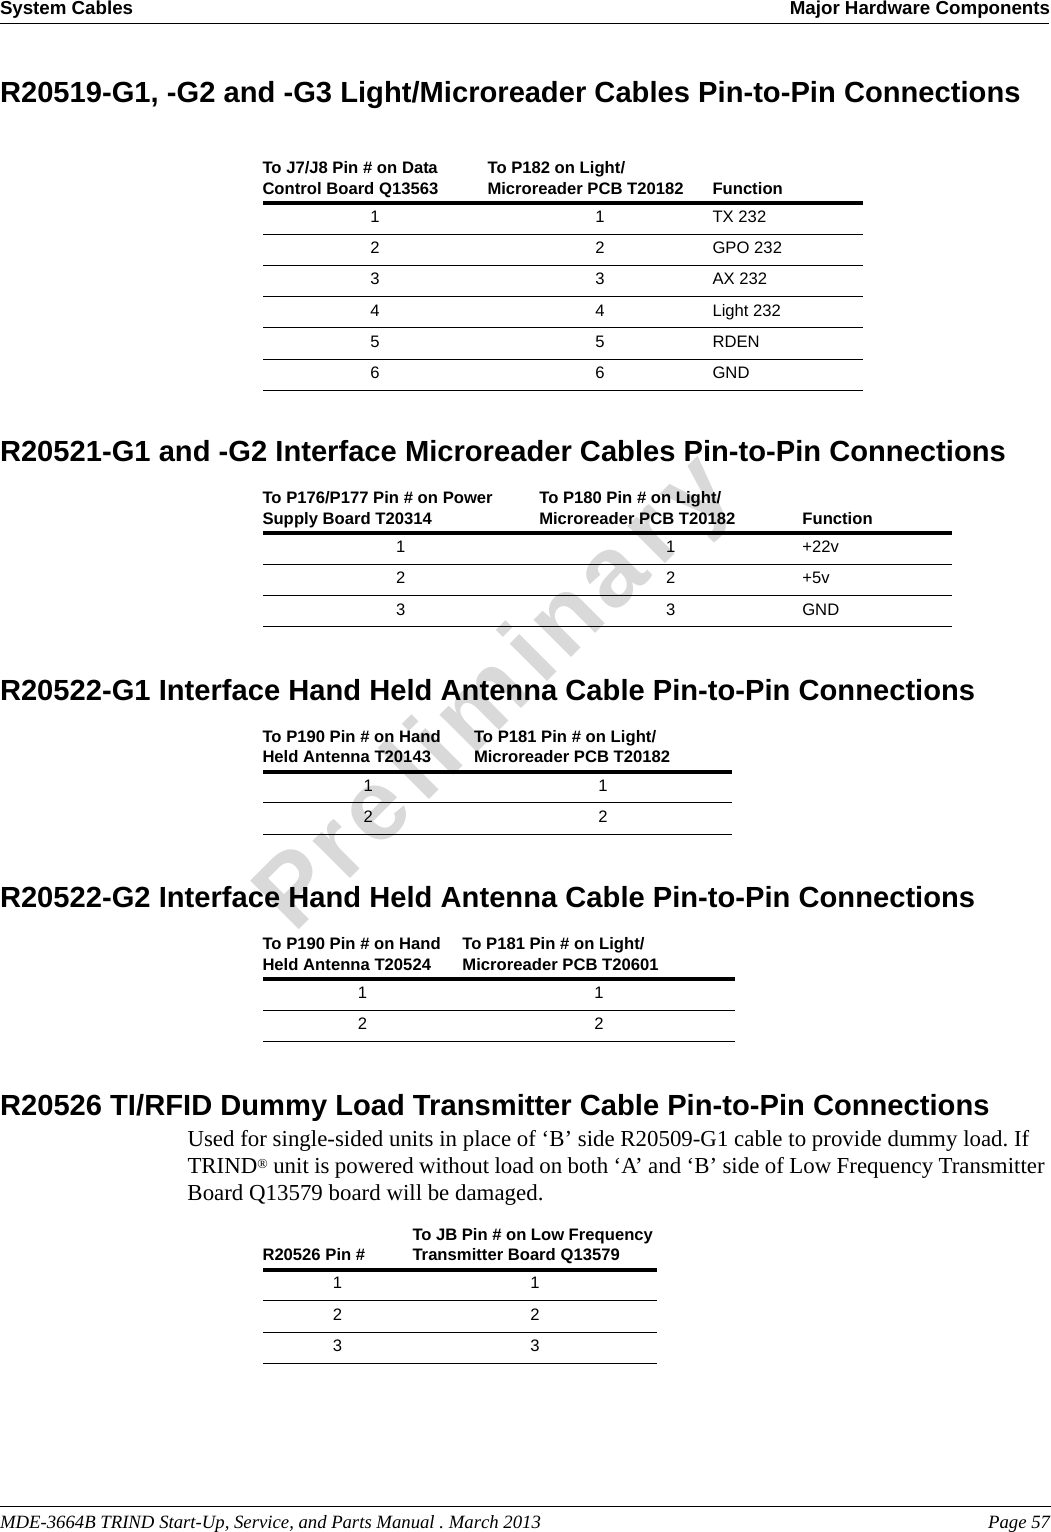 MDE-3664B TRIND Start-Up, Service, and Parts Manual . March 2013 Page 57System Cables Major Hardware ComponentsPreliminaryR20519-G1, -G2 and -G3 Light/Microreader Cables Pin-to-Pin ConnectionsTo J7/J8 Pin # on Data Control Board Q13563 To P182 on Light/Microreader PCB T20182 Function1 1 TX 2322 2 GPO 2323 3 AX 2324 4 Light 2325 5 RDEN6 6 GNDR20521-G1 and -G2 Interface Microreader Cables Pin-to-Pin ConnectionsTo P176/P177 Pin # on Power Supply Board T20314  To P180 Pin # on Light/Microreader PCB T20182 Function1 1 +22v2 2 +5v3 3 GNDR20522-G1 Interface Hand Held Antenna Cable Pin-to-Pin ConnectionsTo P190 Pin # on Hand Held Antenna T20143  To P181 Pin # on Light/Microreader PCB T201821 12 2R20522-G2 Interface Hand Held Antenna Cable Pin-to-Pin ConnectionsTo P190 Pin # on Hand Held Antenna T20524  To P181 Pin # on Light/Microreader PCB T206011 12 2R20526 TI/RFID Dummy Load Transmitter Cable Pin-to-Pin ConnectionsUsed for single-sided units in place of ‘B’ side R20509-G1 cable to provide dummy load. If TRIND® unit is powered without load on both ‘A’ and ‘B’ side of Low Frequency Transmitter Board Q13579 board will be damaged. R20526 Pin # To JB Pin # on Low Frequency Transmitter Board Q135791 12 23 3